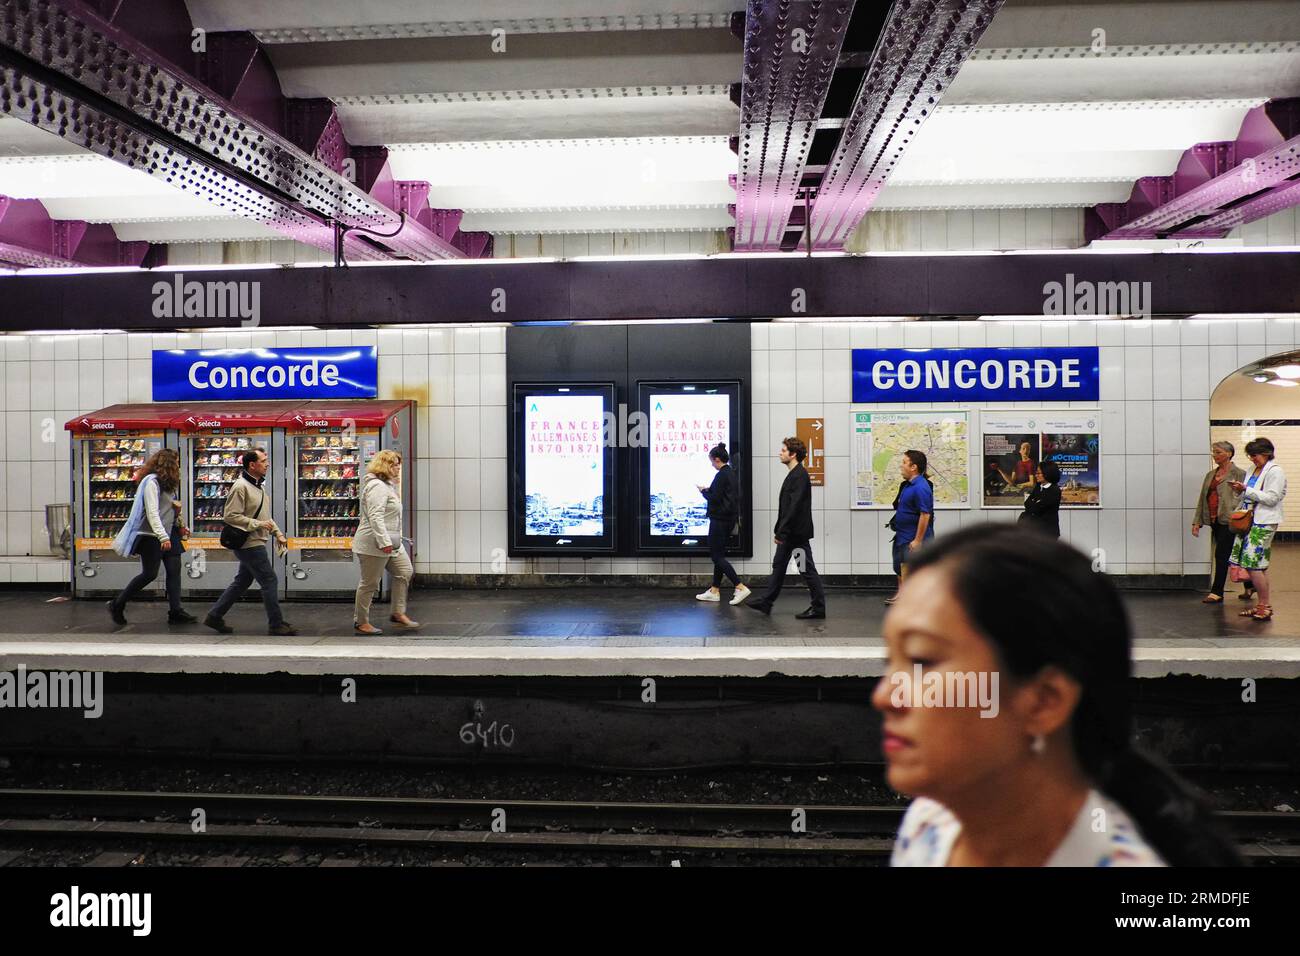 An open view of Concorde metro station platform with a few people, metro map and signs, vending machines, purple and white painted iron beams Stock Photo